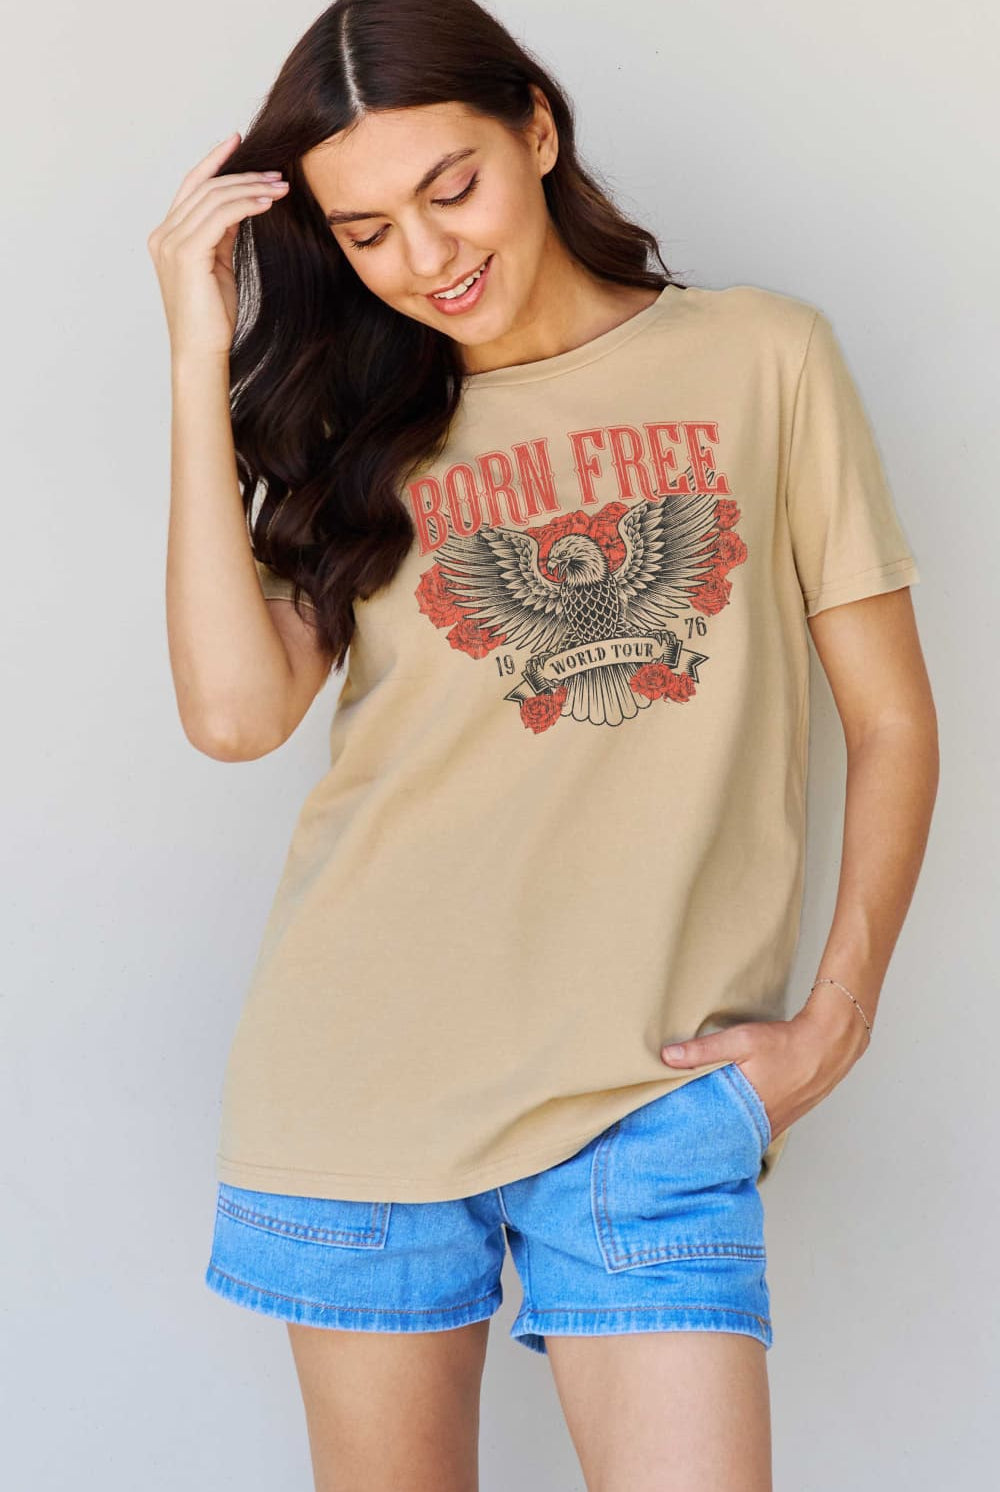 Gray Simply Love Full Size BORN FREE 1976 WORLD TOUR Graphic Cotton T-Shirt Graphic Tees